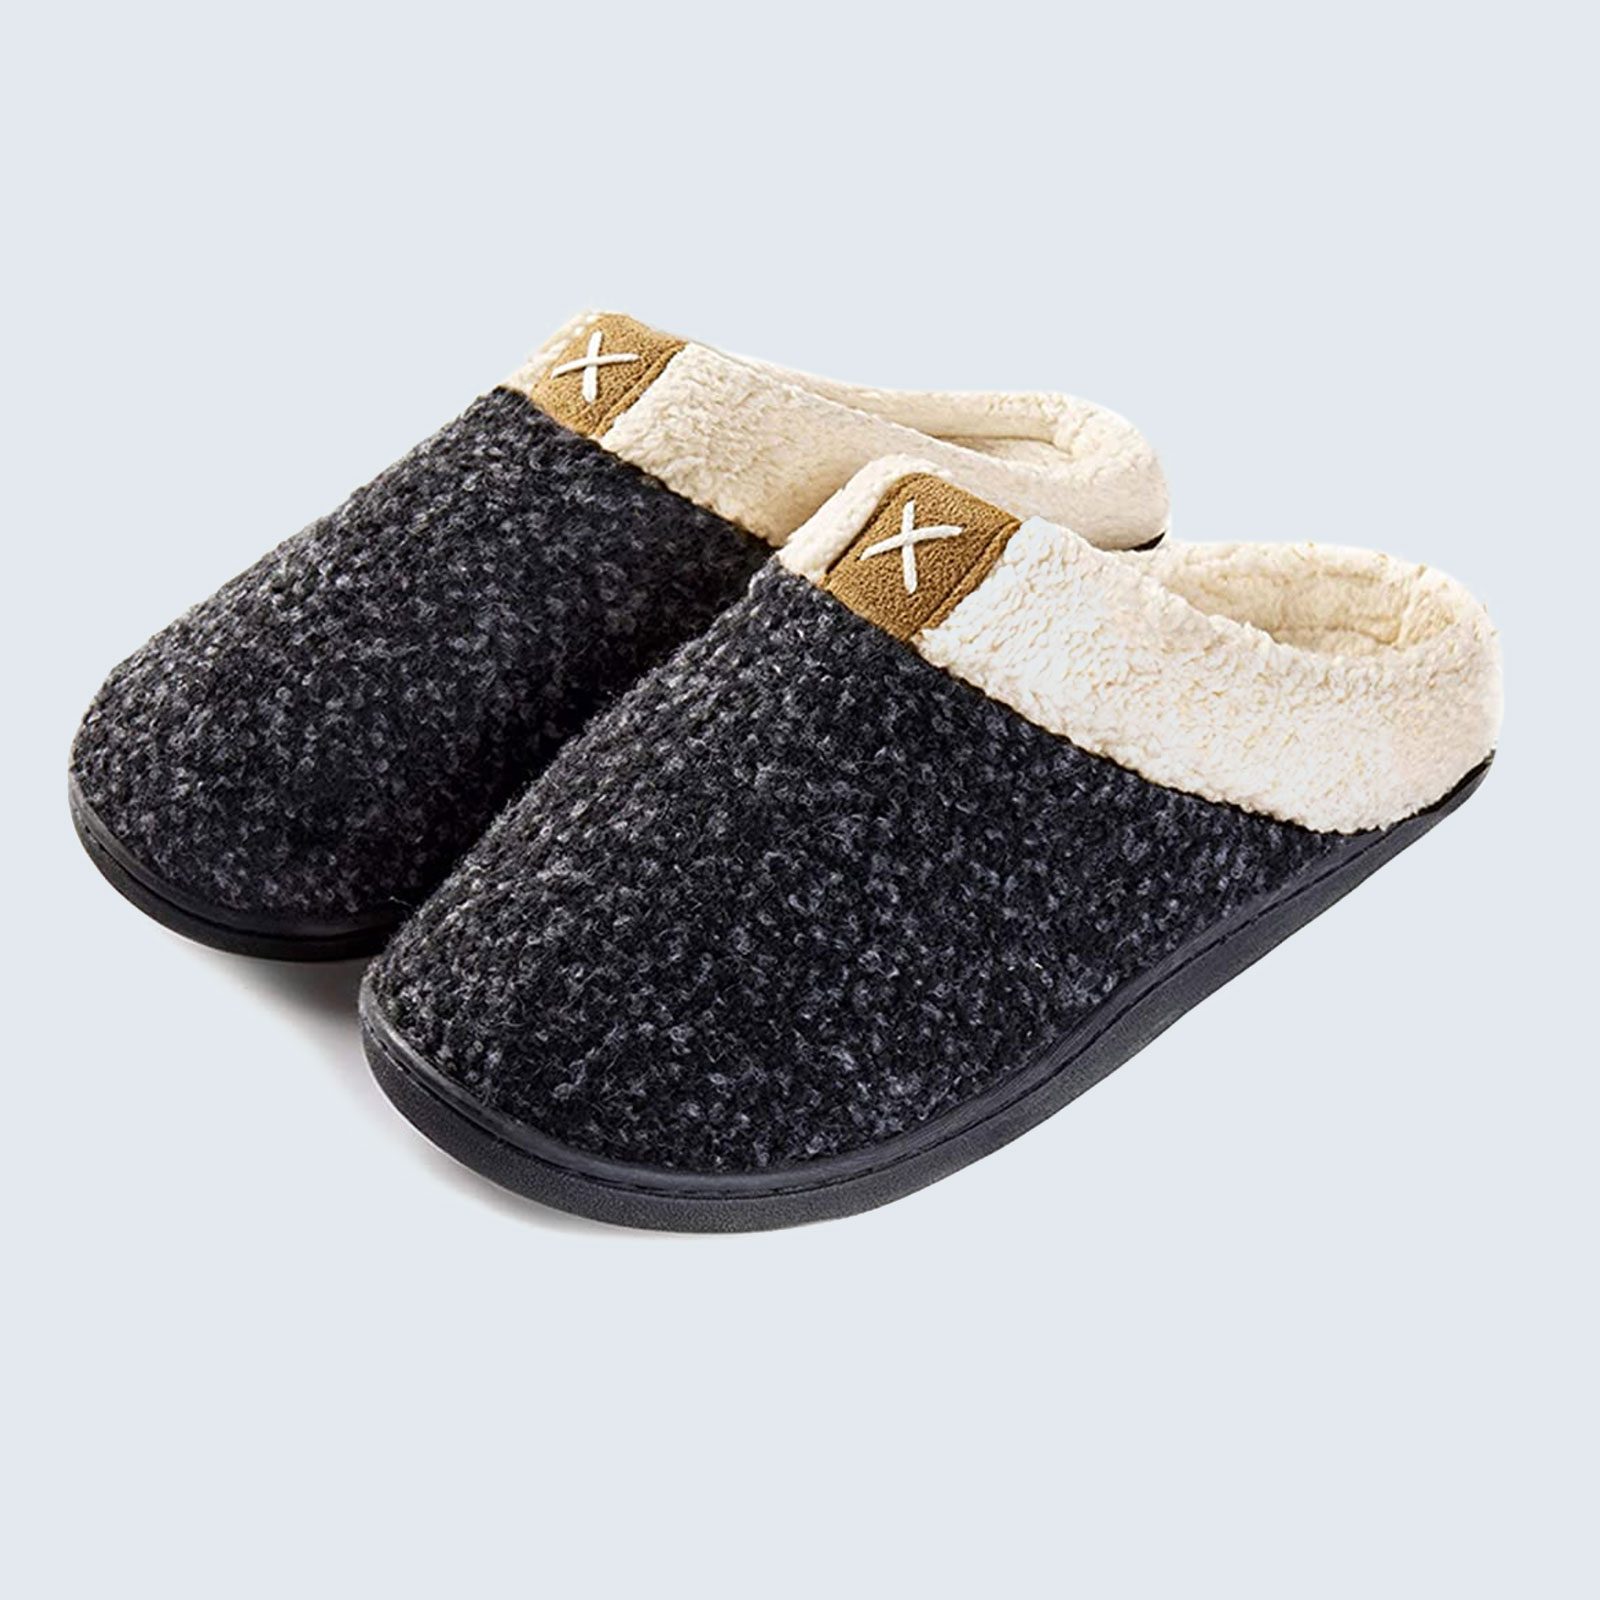 12 Best Slippers for Women 2022 — Comfy Women's Slippers for the House